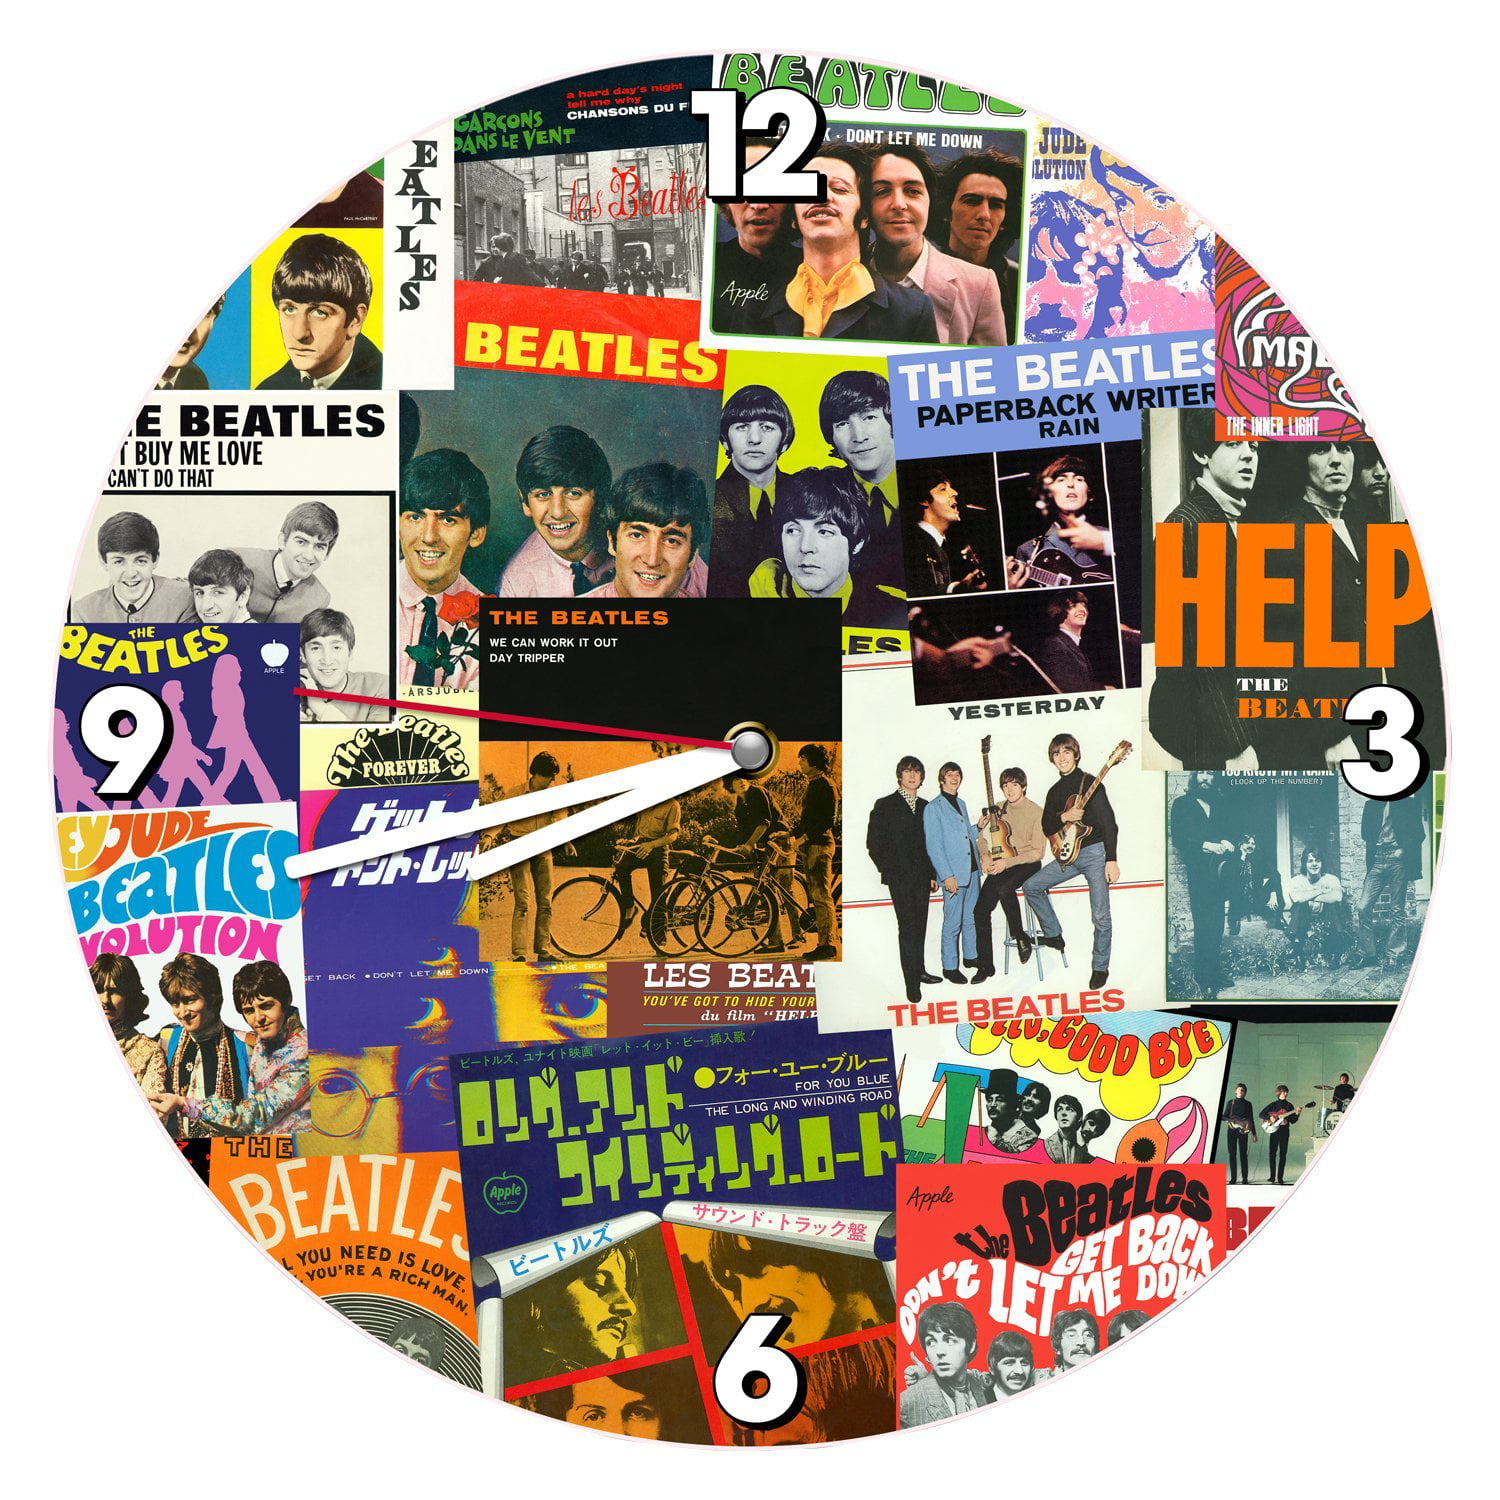 The Beatles Novelty Cd Clock Can be personalised 